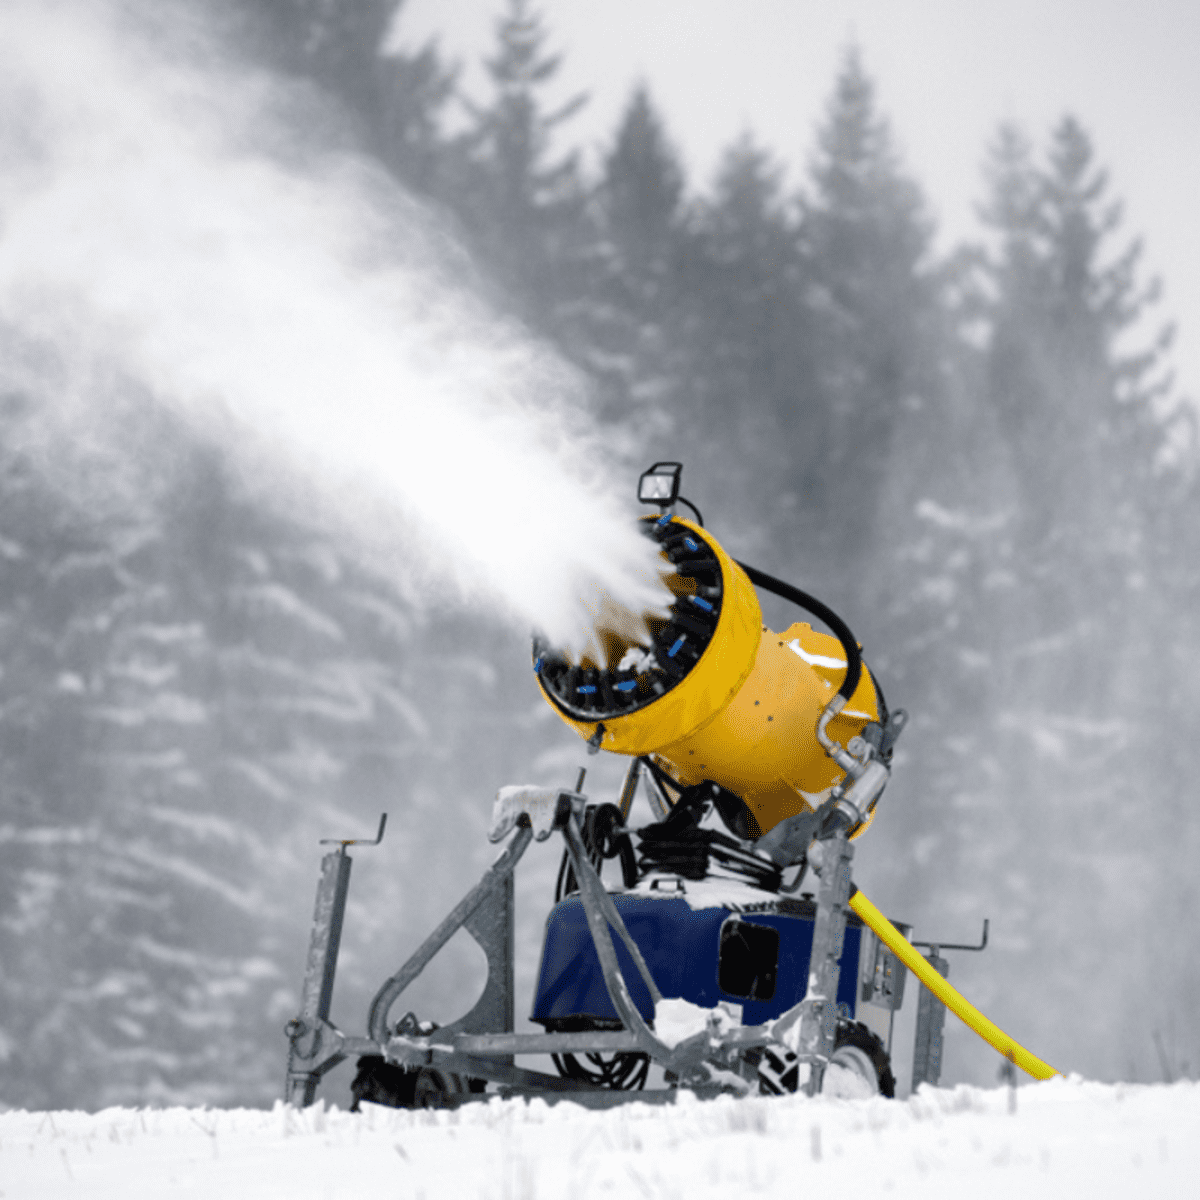 Professional Home Snowmaking Machines - Snow State